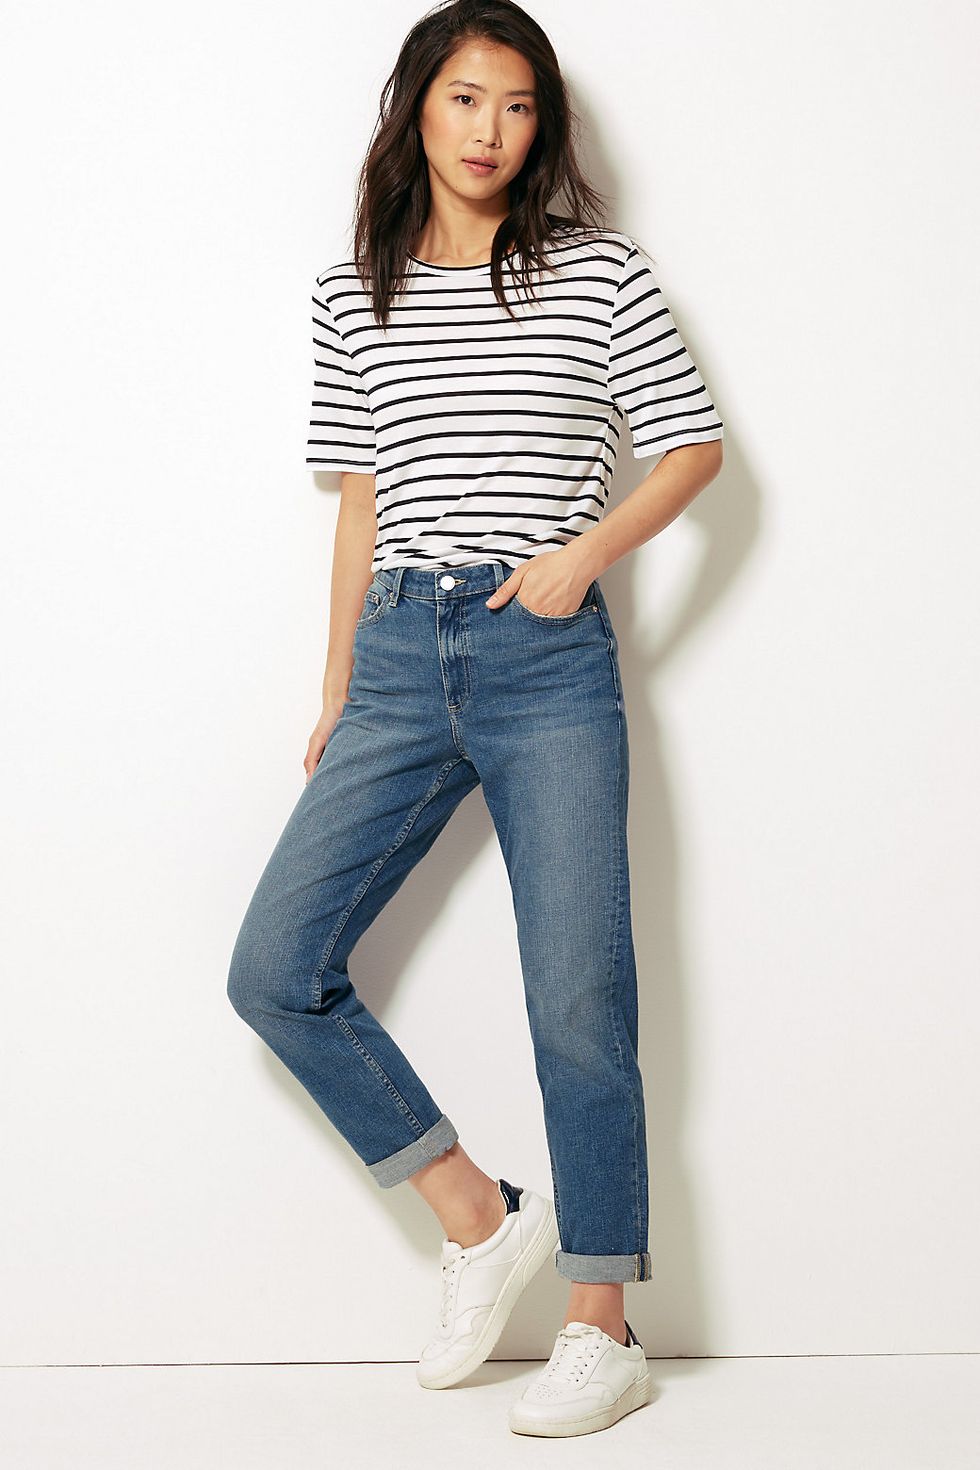 Slim Bootcut Jeans, M&S Collection